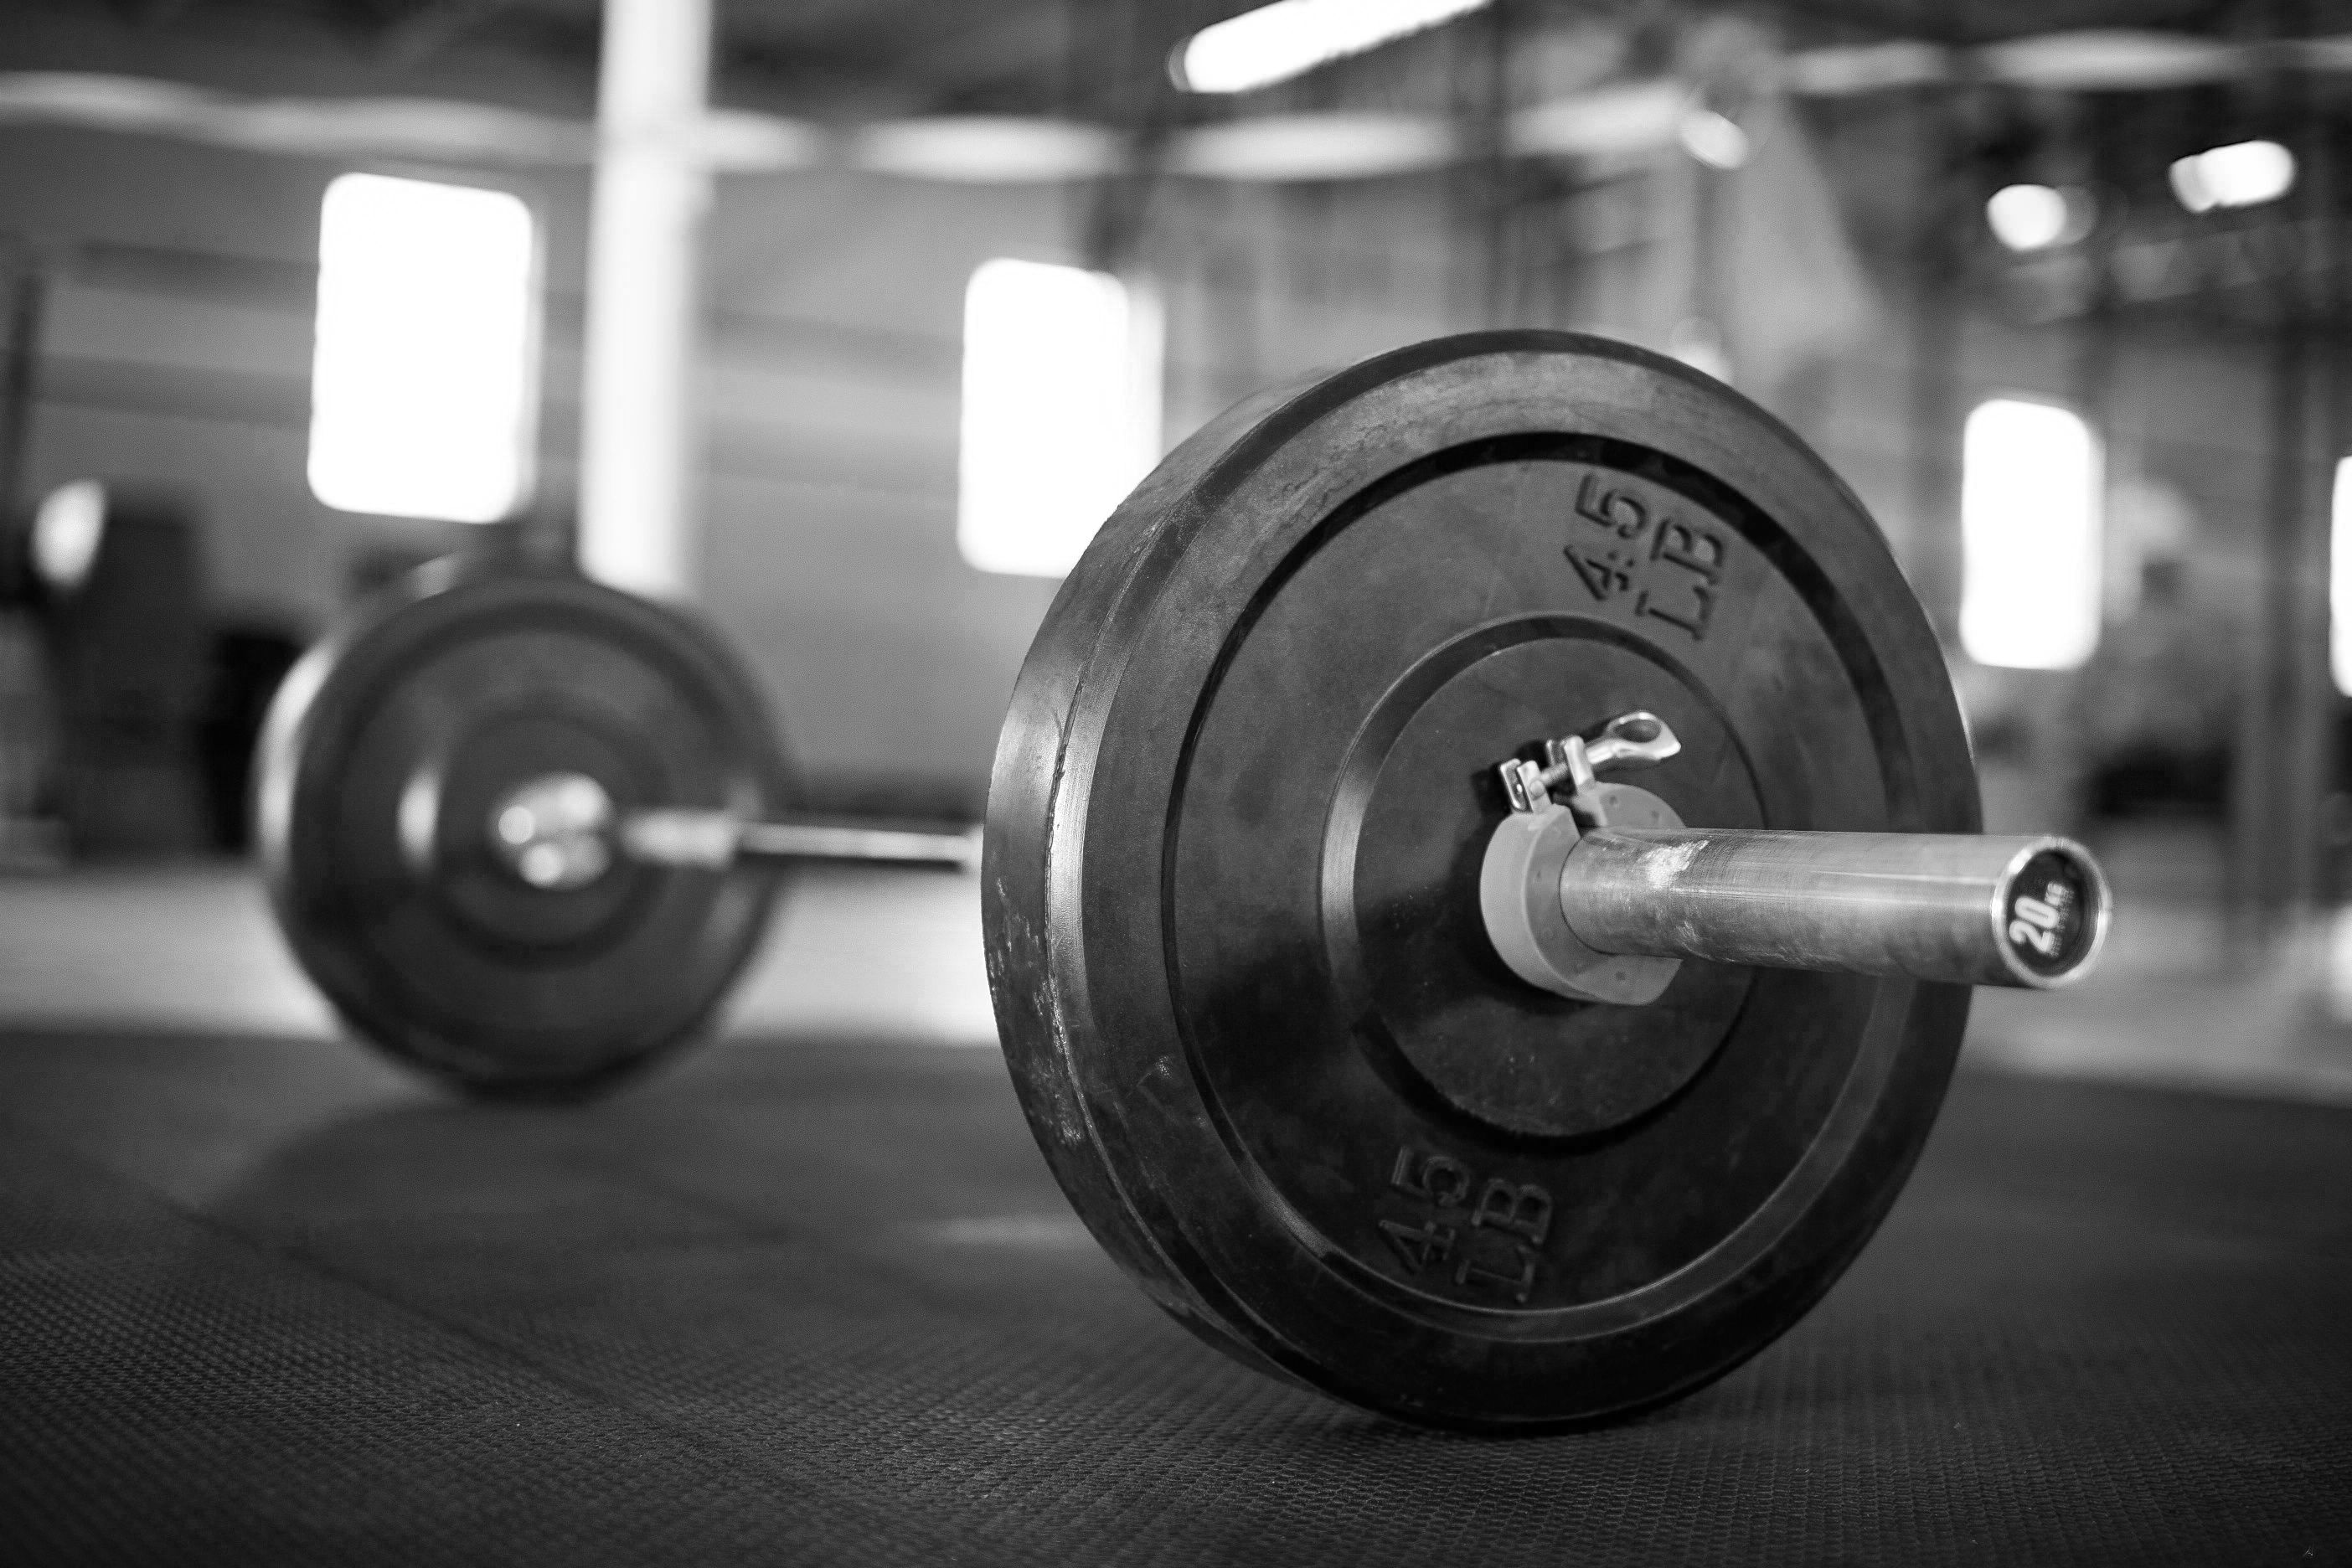 barbell - Google Search | A-Projects | Pinterest | Crossfit ...